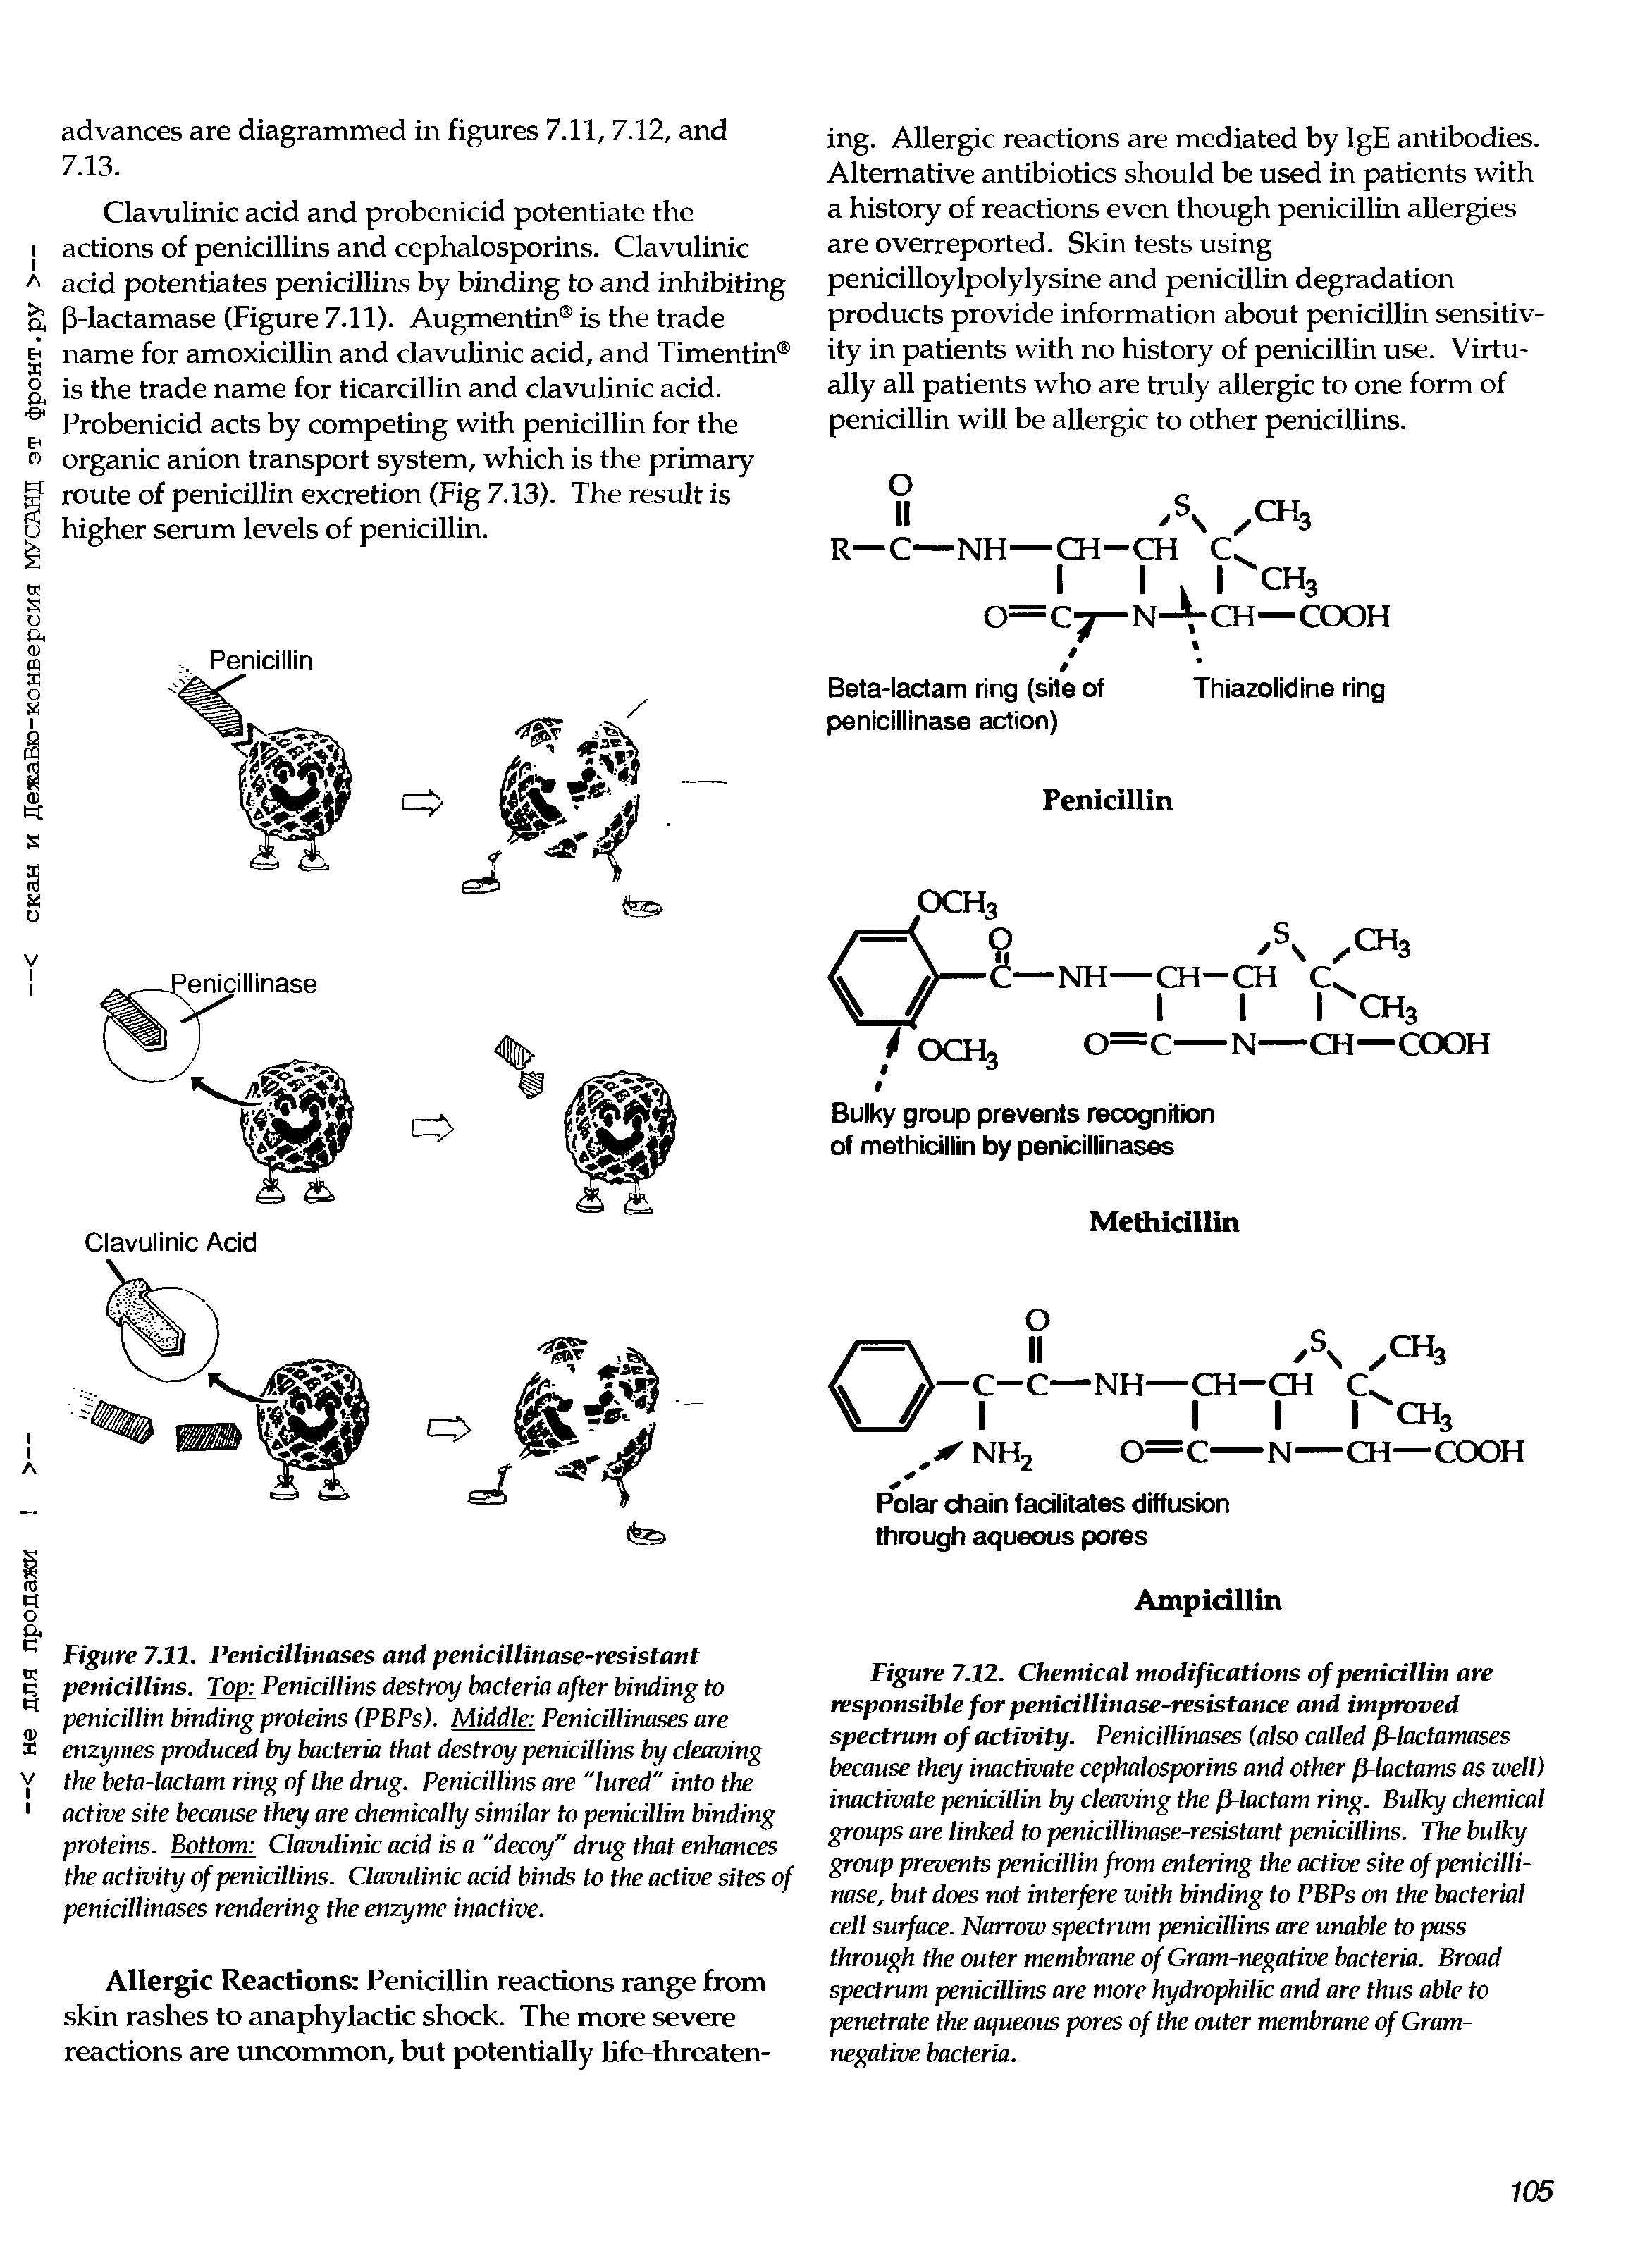 Figure 7.12. Chemical modifications of penicillin are responsible for penicillinase-resistance and improved spectrum of activity. Penicillinases (also called fi-lactamases because they inactivate cephalosporins and other fi-lactams as well) inactivate penicillin by cleaving the fi-lactam ring. Bulky chemical groups are linked to penicillinase-resistant penicillins. The bulky group prevents penicillin from entering the active site of penicillinase, but does not interfere with binding to PBPs on the bacterial cell surface. Narrow spectrum penicillins are unable to pass through the outer membrane of Gram-negative bacteria. Broad spectrum penicillins are more hydrophilic and are thus able to penetrate the aqueous pores of the outer membrane of Gramnegative bacteria.